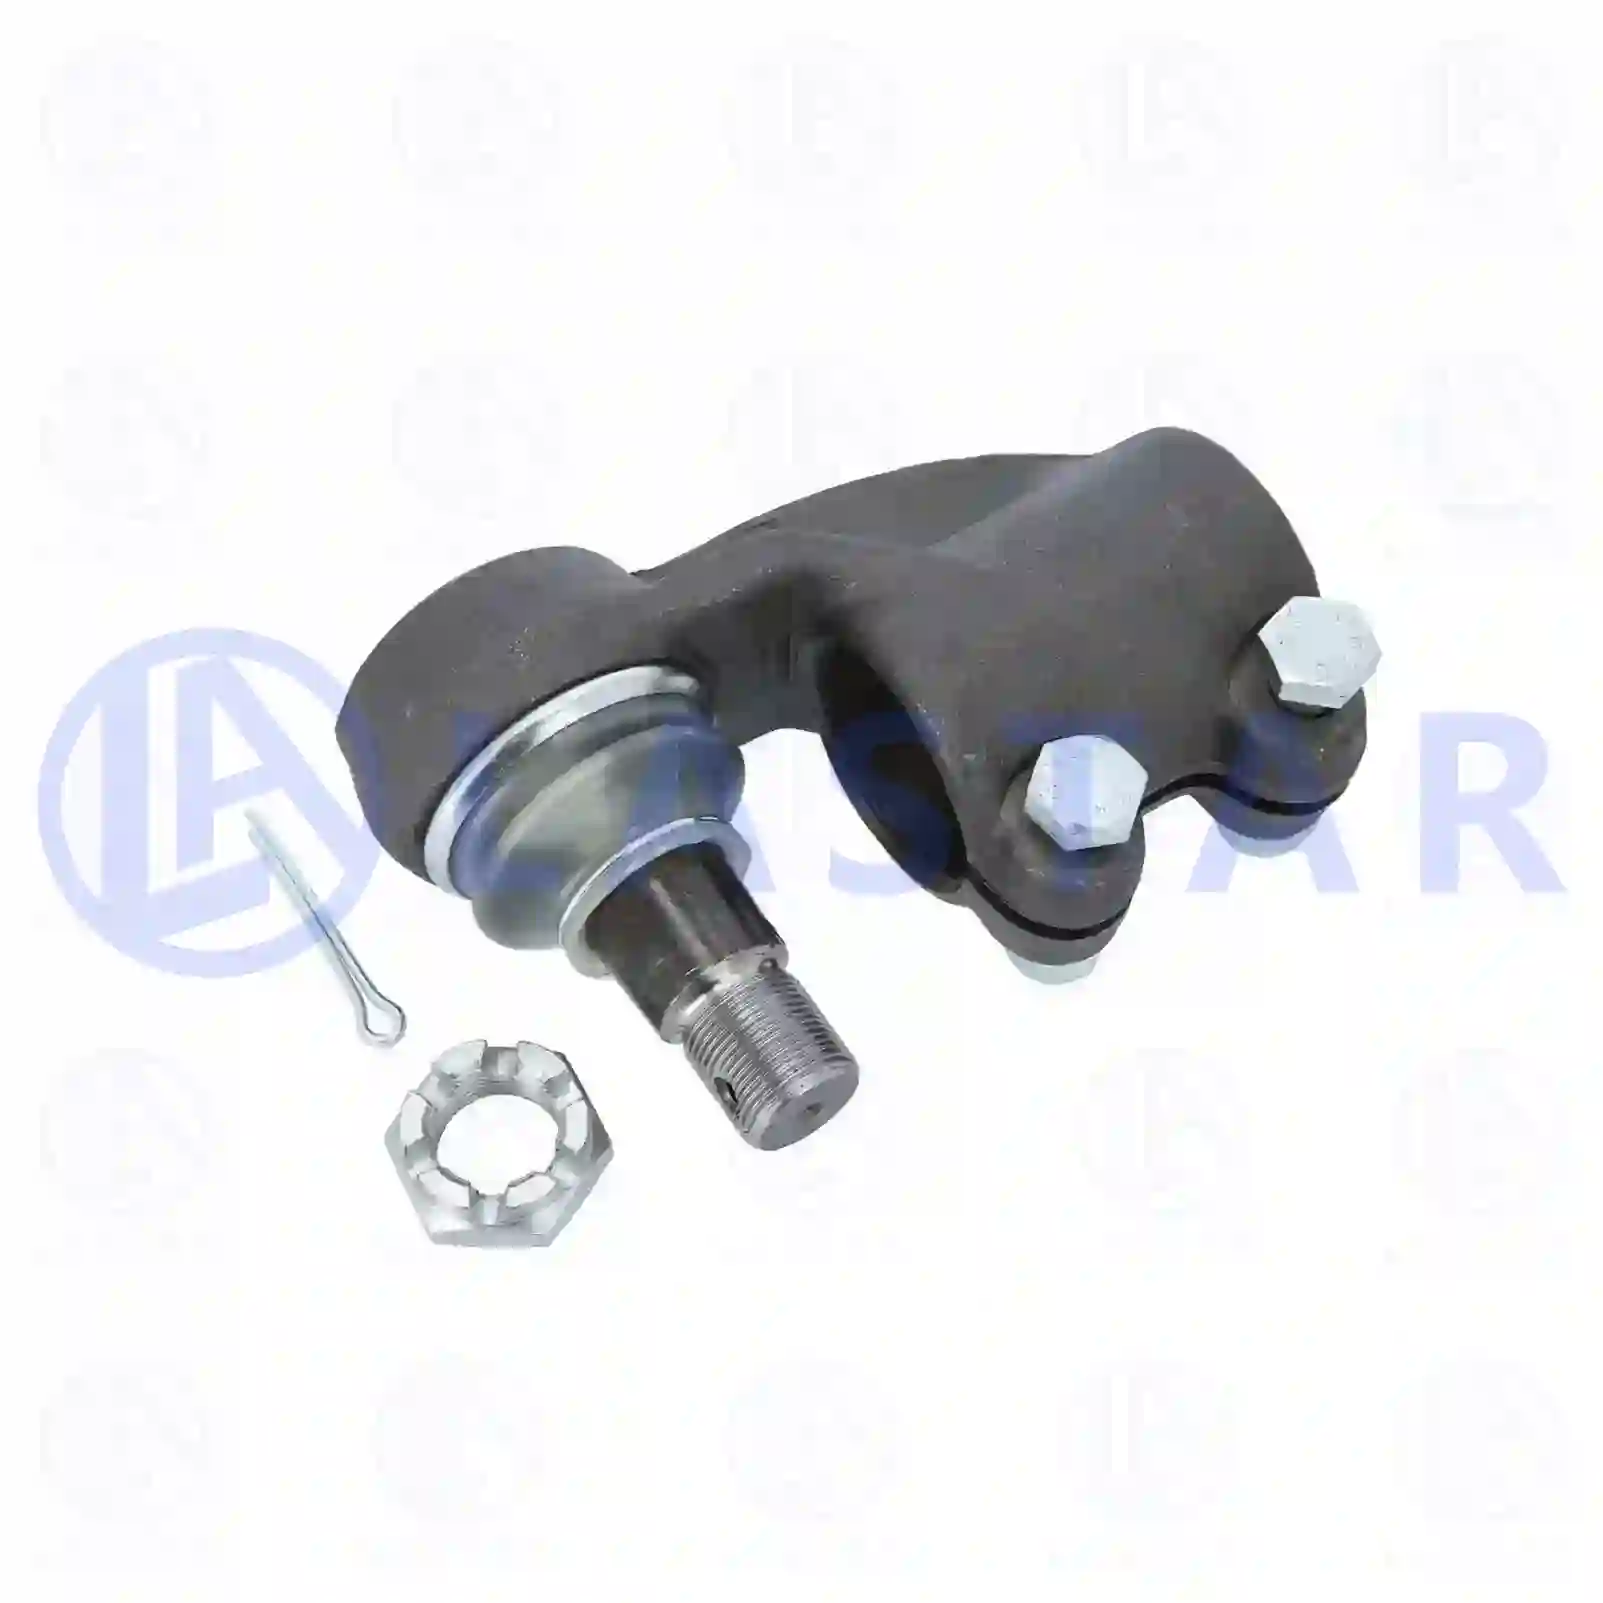 Ball joint, 77705613, 1235514 ||  77705613 Lastar Spare Part | Truck Spare Parts, Auotomotive Spare Parts Ball joint, 77705613, 1235514 ||  77705613 Lastar Spare Part | Truck Spare Parts, Auotomotive Spare Parts